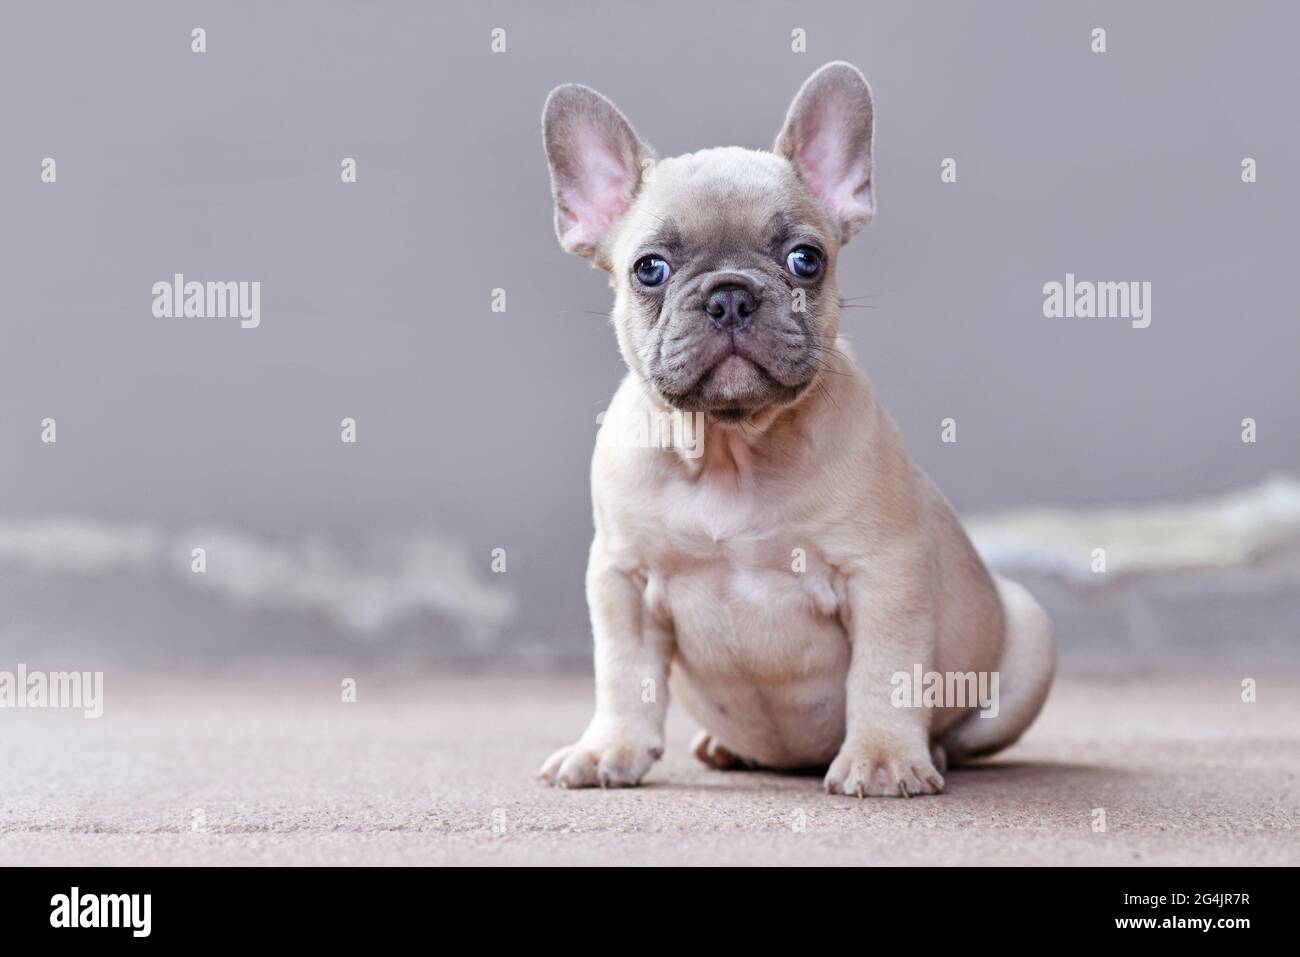 Small lilac fawn colored French Bulldog dog puppy with large funny blue eyes sitting in front of gray wall with copy space Stock Photo